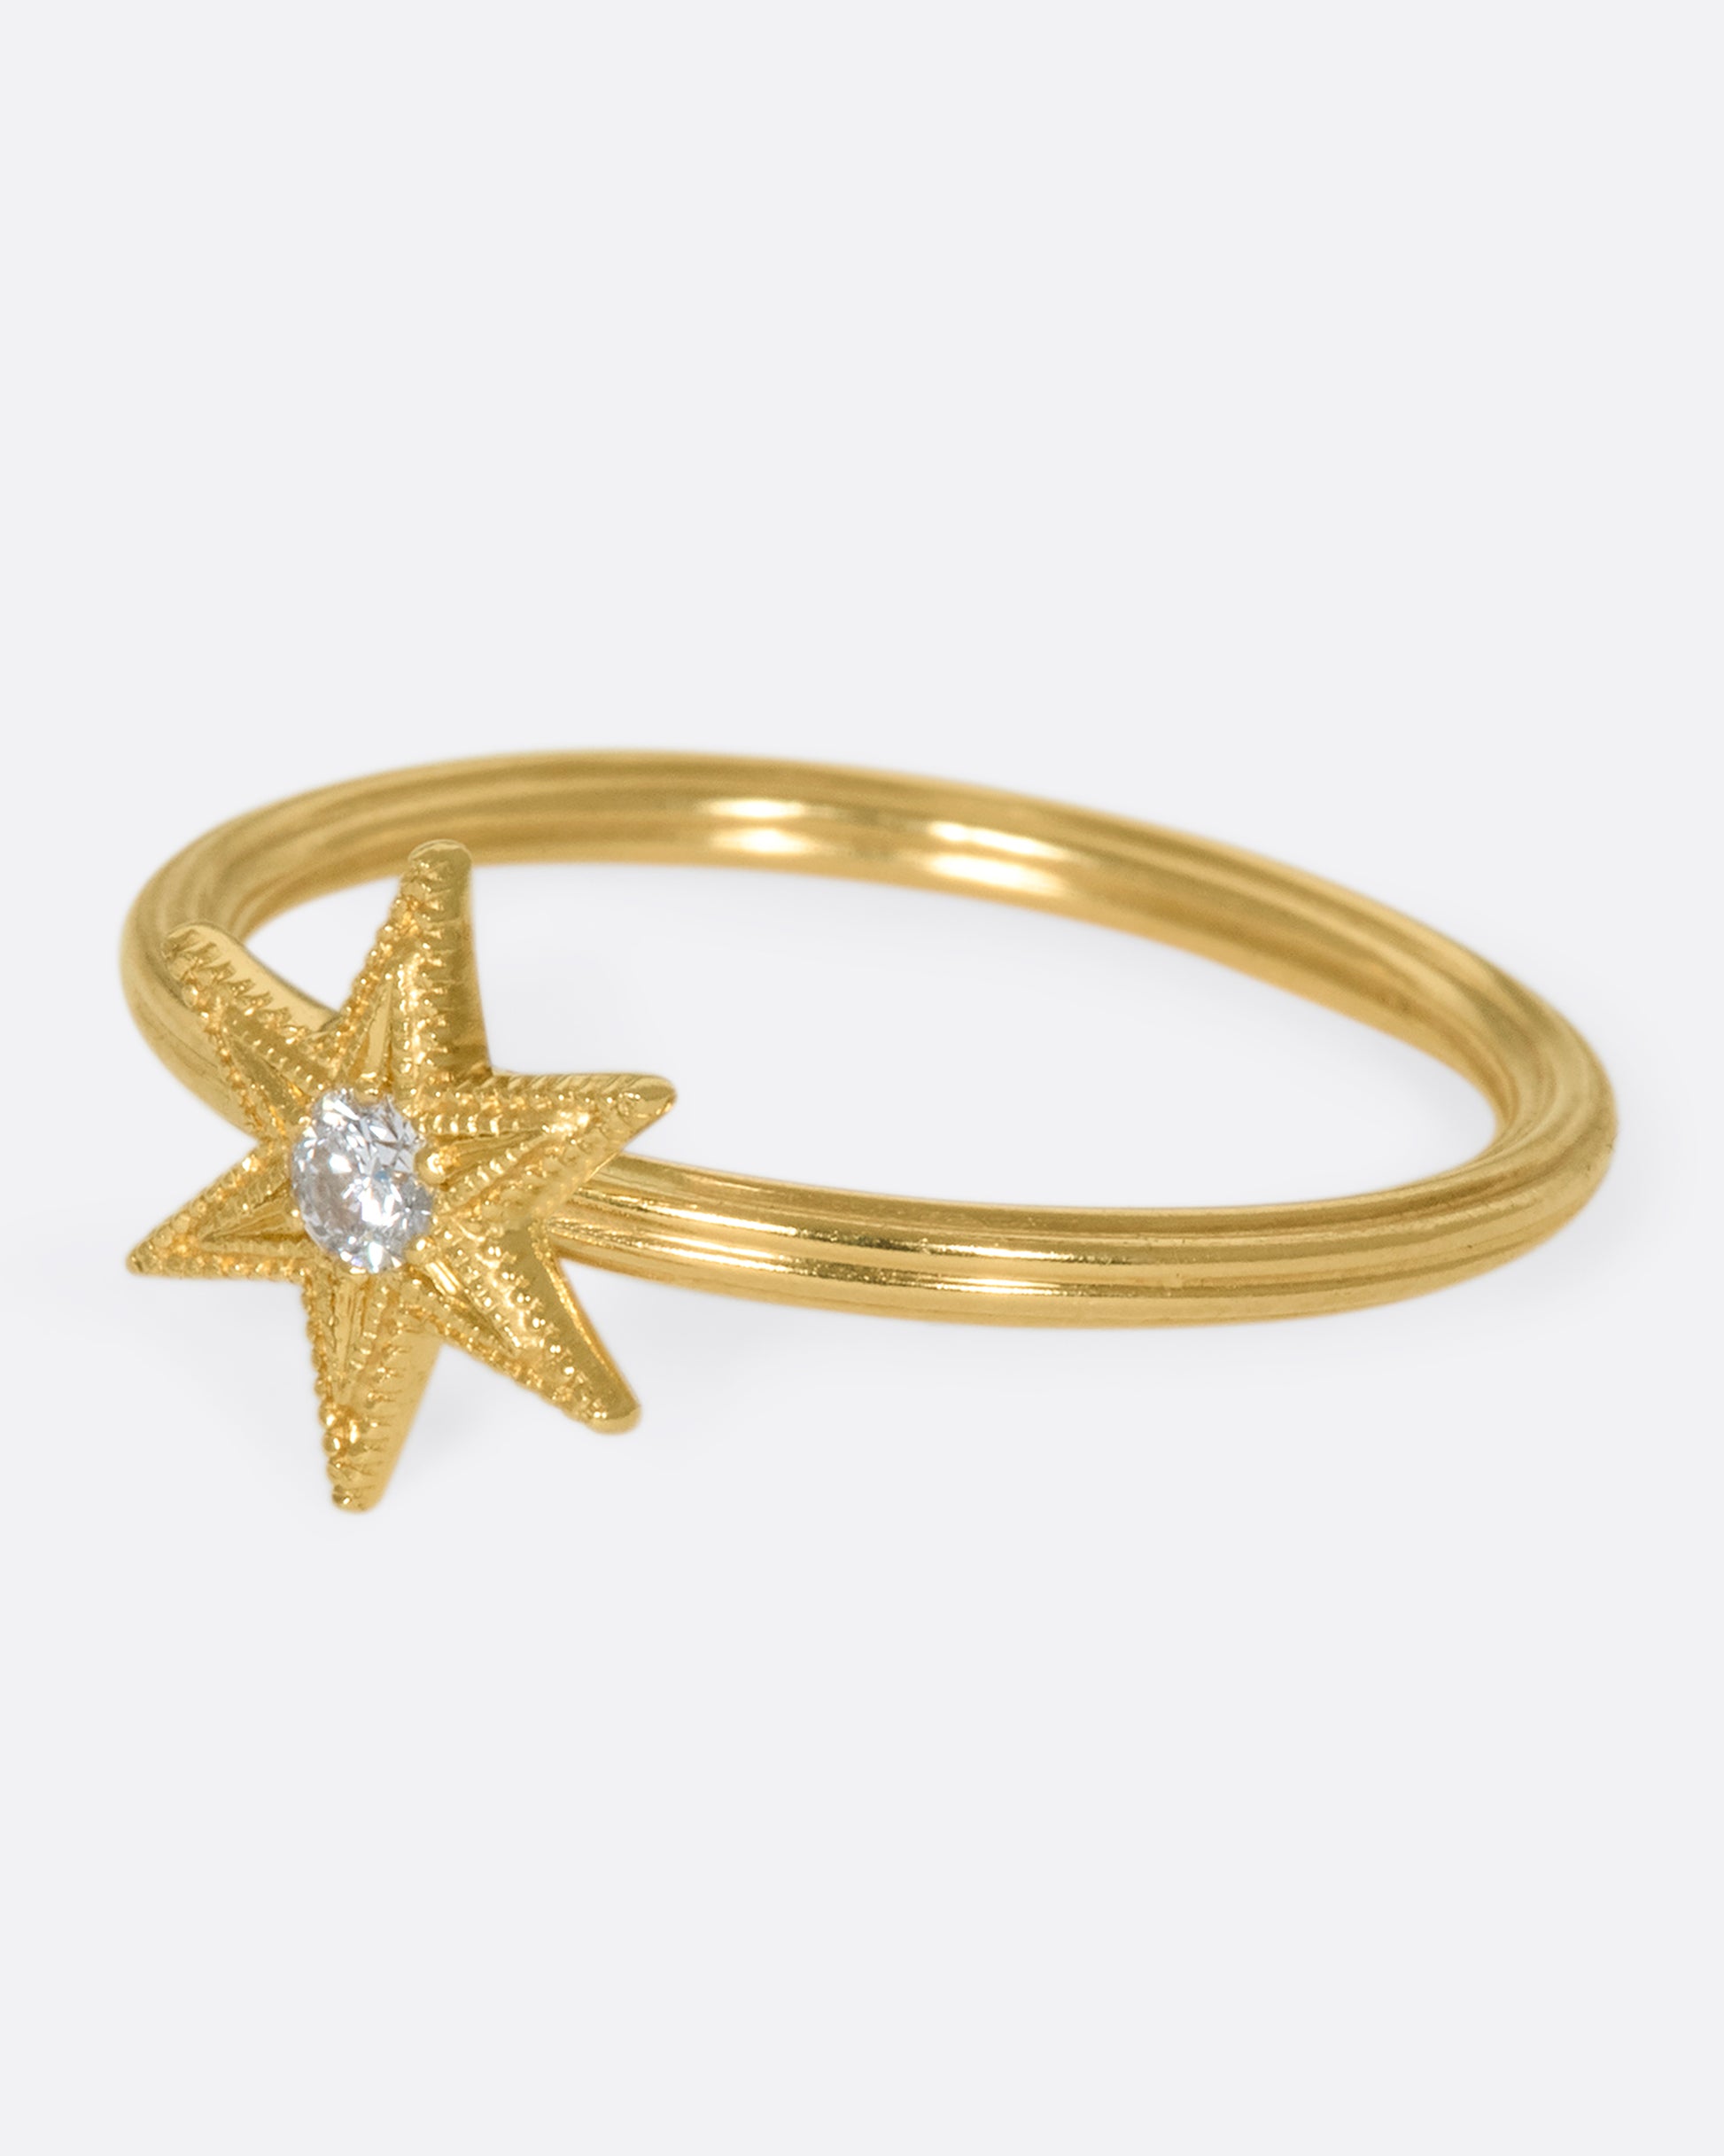 An 18k gold six-point star ring with a round diamond nestled in the center